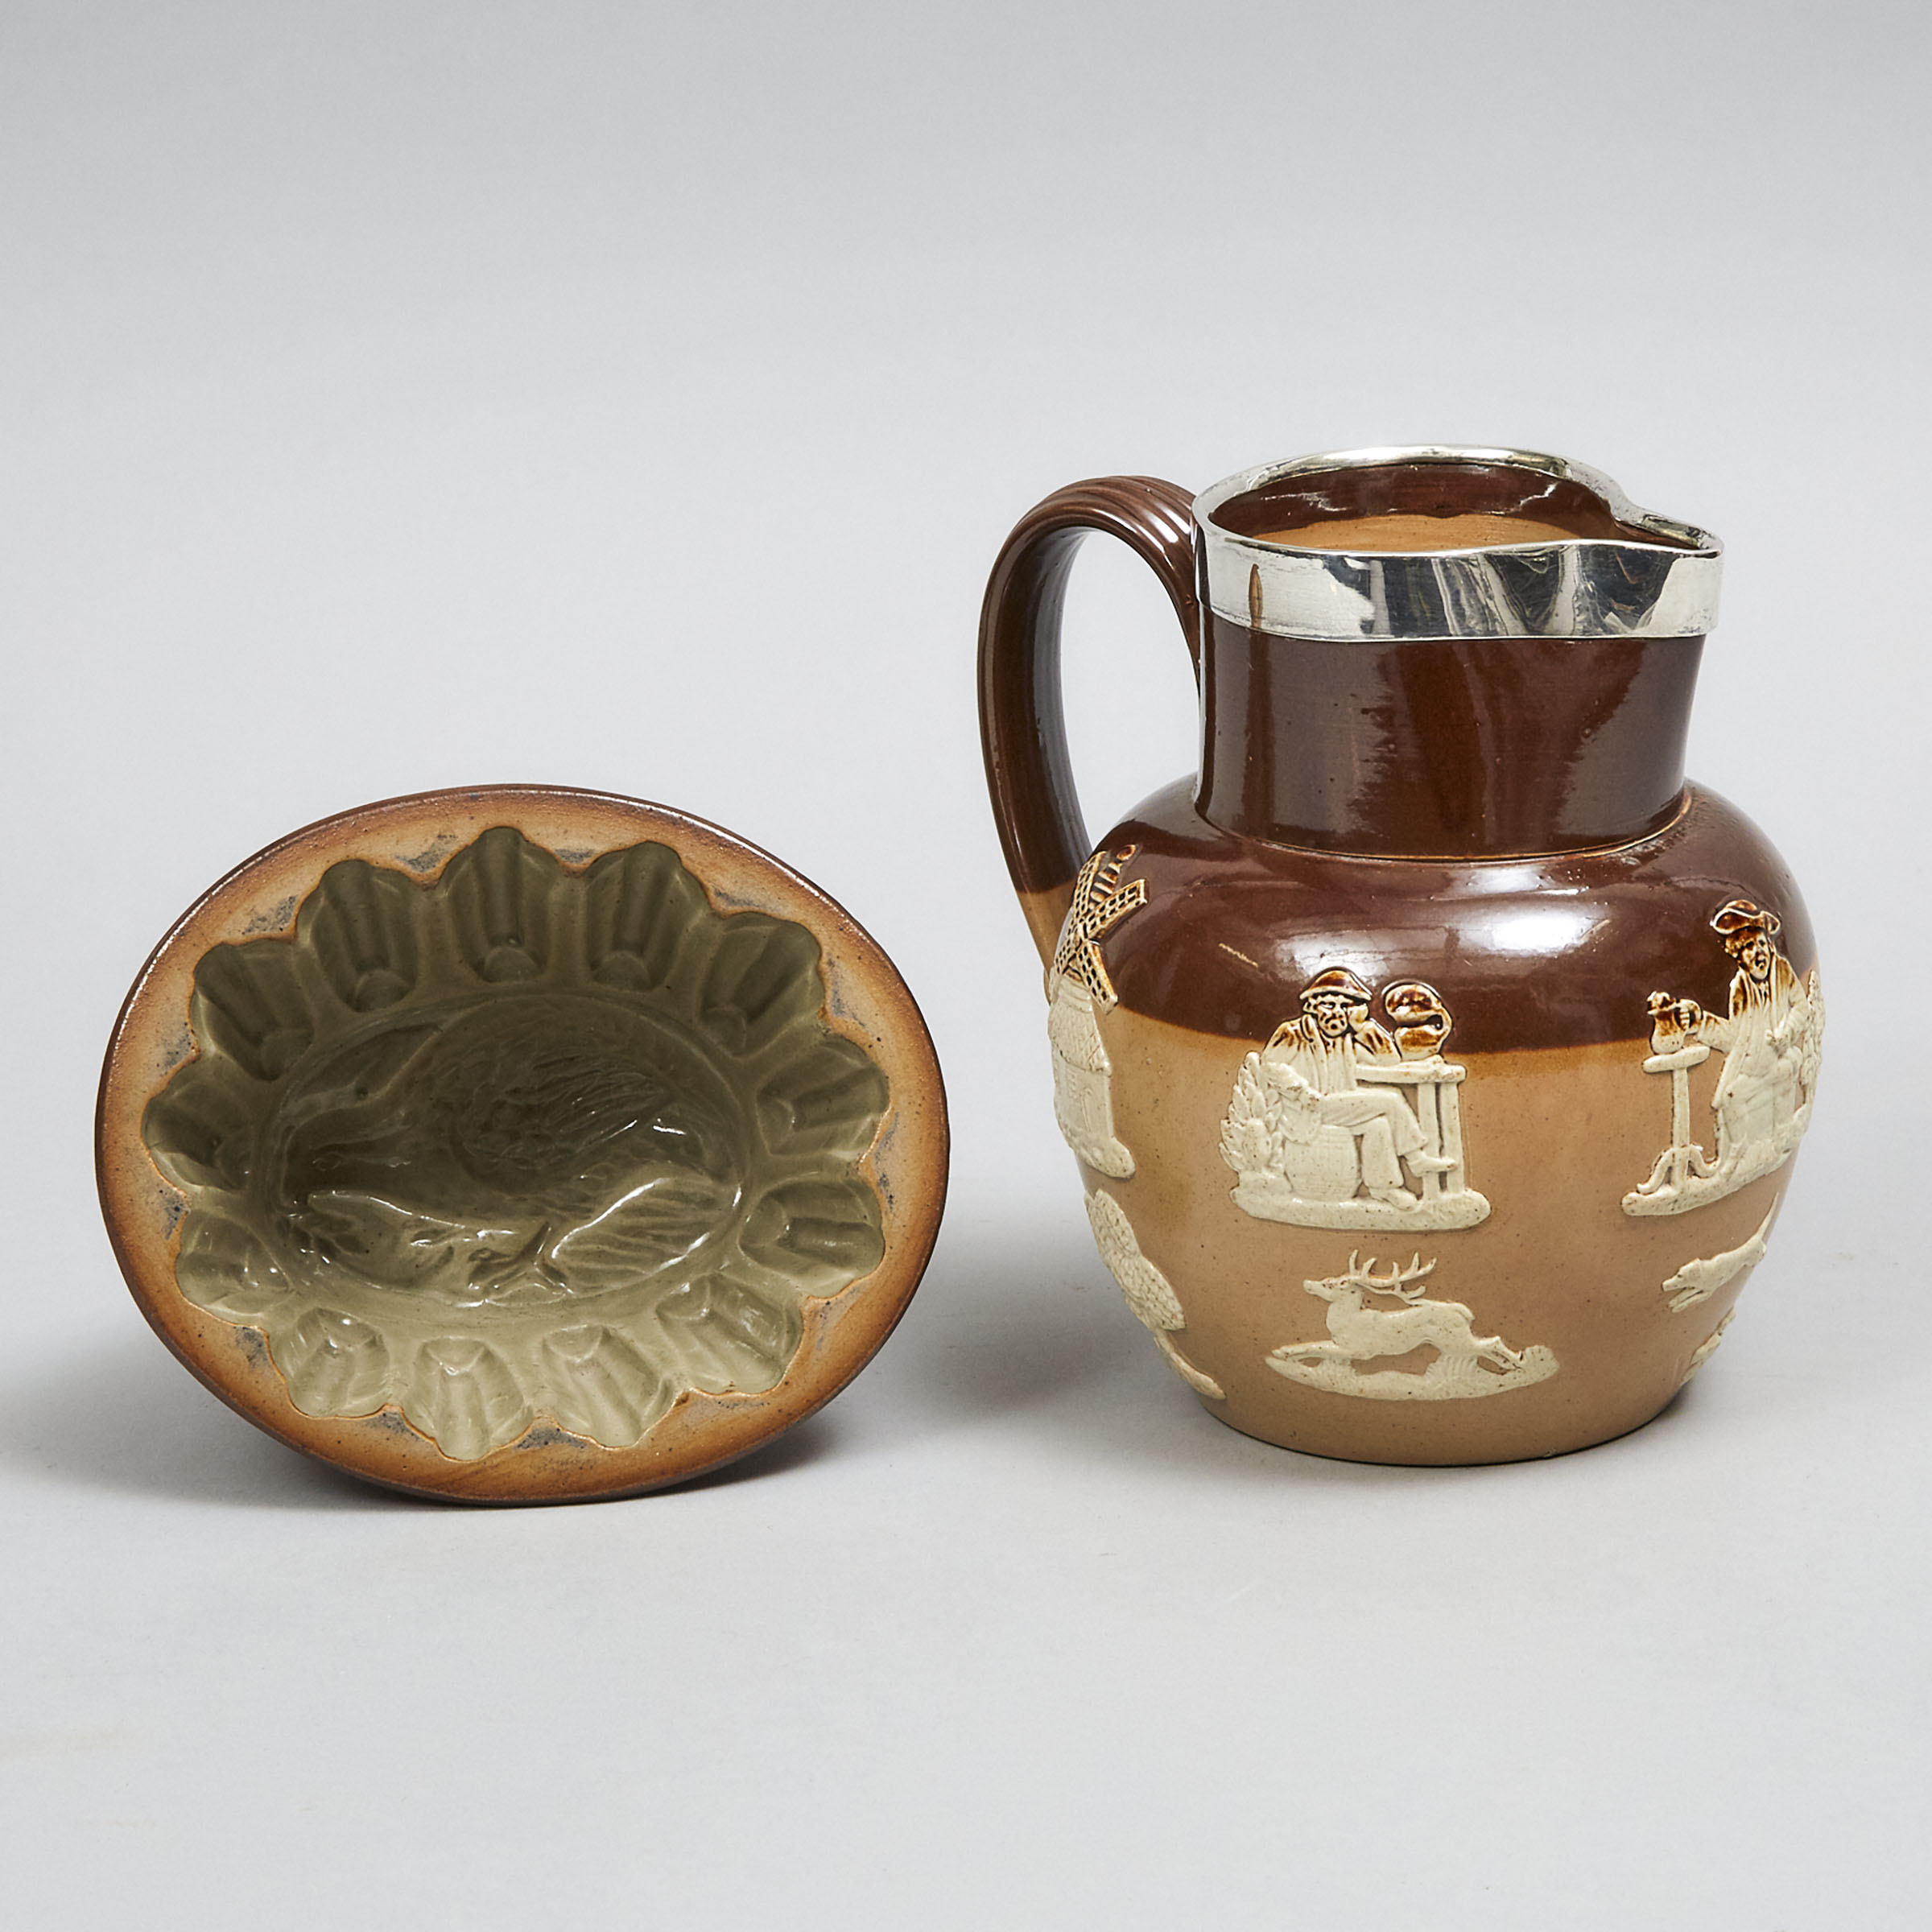 Doulton Lambeth Silver Mounted Stoneware Jug and an English Stoneware Jelly Mould, late 19th century